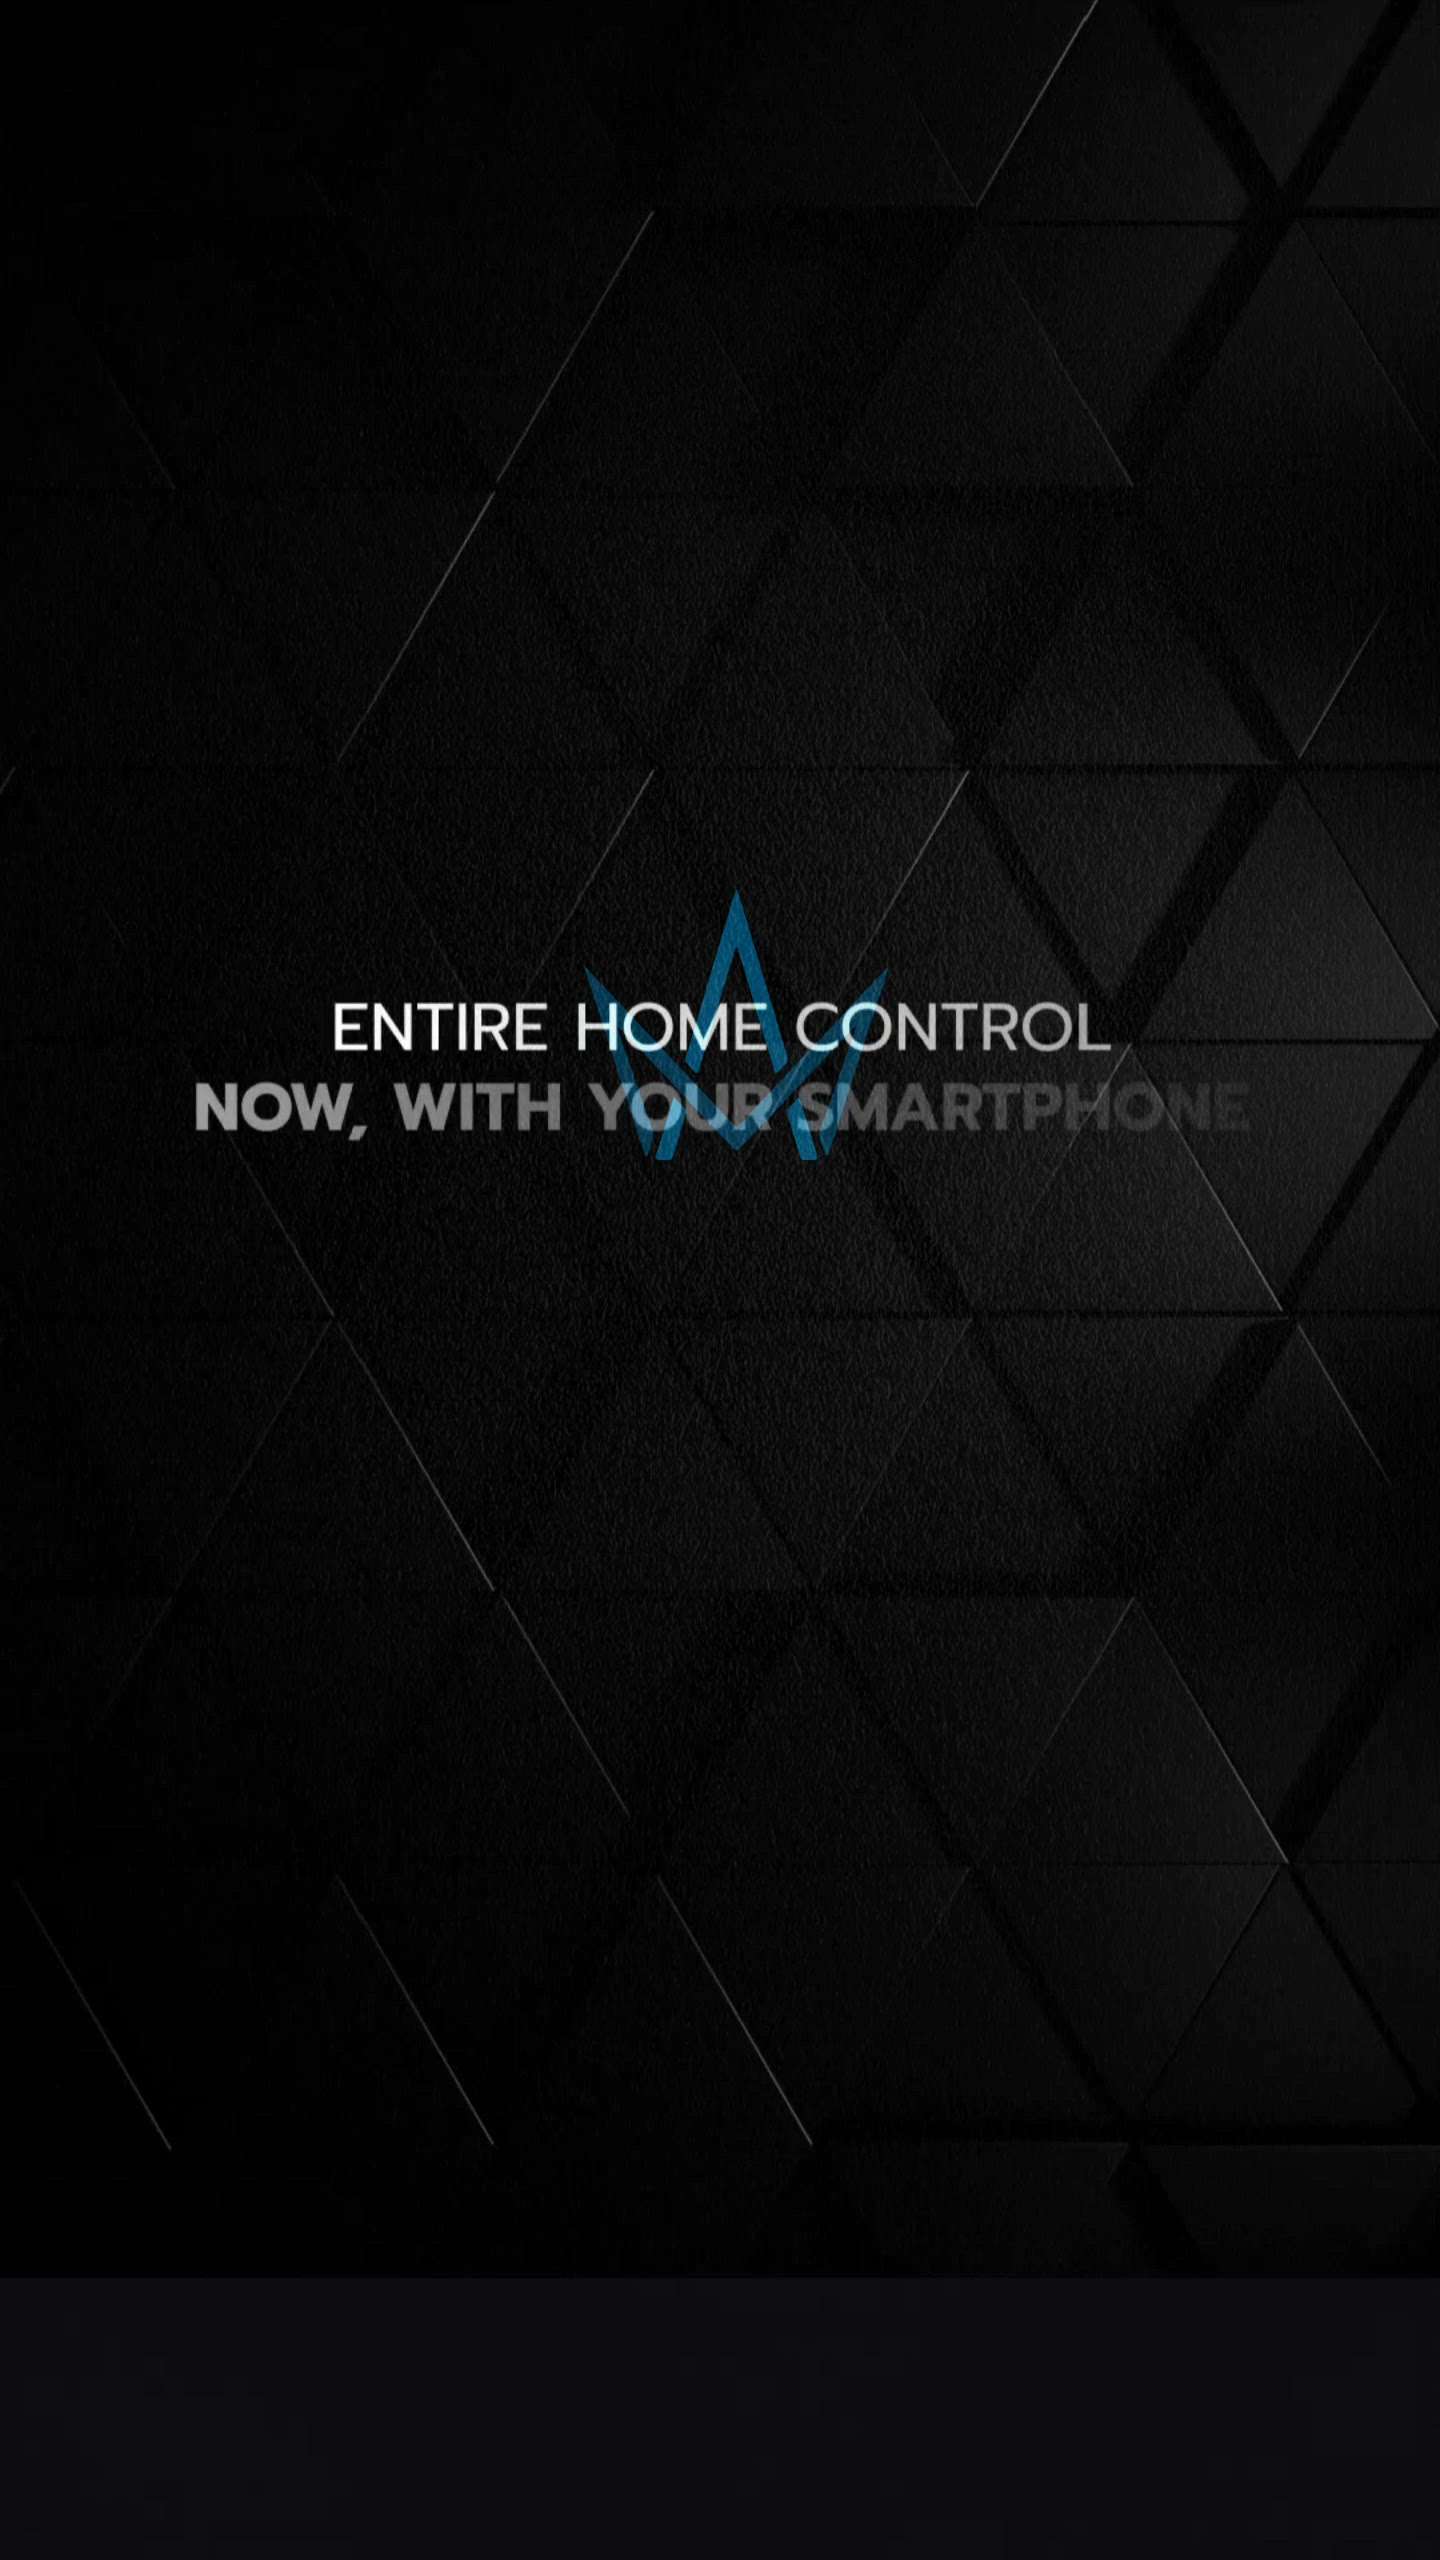 Get home automation solutions from us. 
Time has changed, now having your commands follow isnt a luxury anymore

Yes thats right have all your commands followed:
Turn on the ac,
Change the tv channel,
Turn off the lights or Close up your blinds and curtains without finding the remote or getting up.
Just say the words and have your wish be our command.


Contact us for a free demo and estimate.

#smartliving #smarthome #smartblinds #homeautomationindia #alexa #okgoogle #modularswitches #homeautomation #homedecor#automatedscenes #smartlights #smartindia #airsensor #motionsensor #royalautomation #hometheater #hometheaterexperts #hometheaterdesign #homegoals #movietime #luxurylifestyle #luxuryhomes #luxurious #dreamhome #perfecthouse #powersaving #architecture #architect #interiordesign #internetofthings